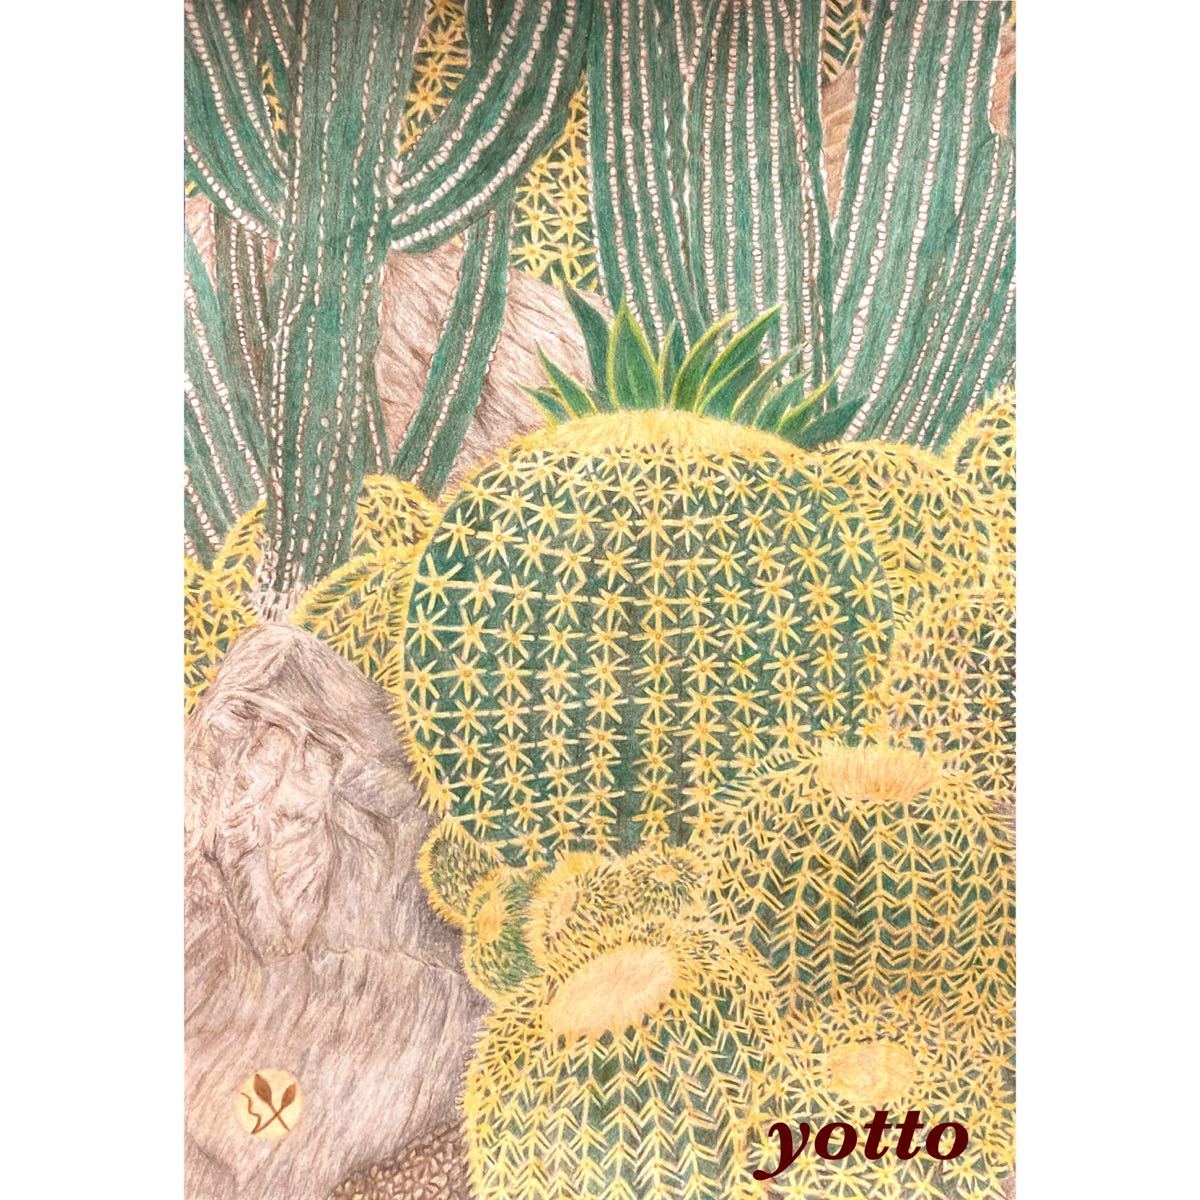 Colored pencil drawing Cactus ~ Kinshachi ~ B5 with frame◇◆Hand-drawn◇Original picture◆Yotto◇, artwork, painting, pencil drawing, charcoal drawing